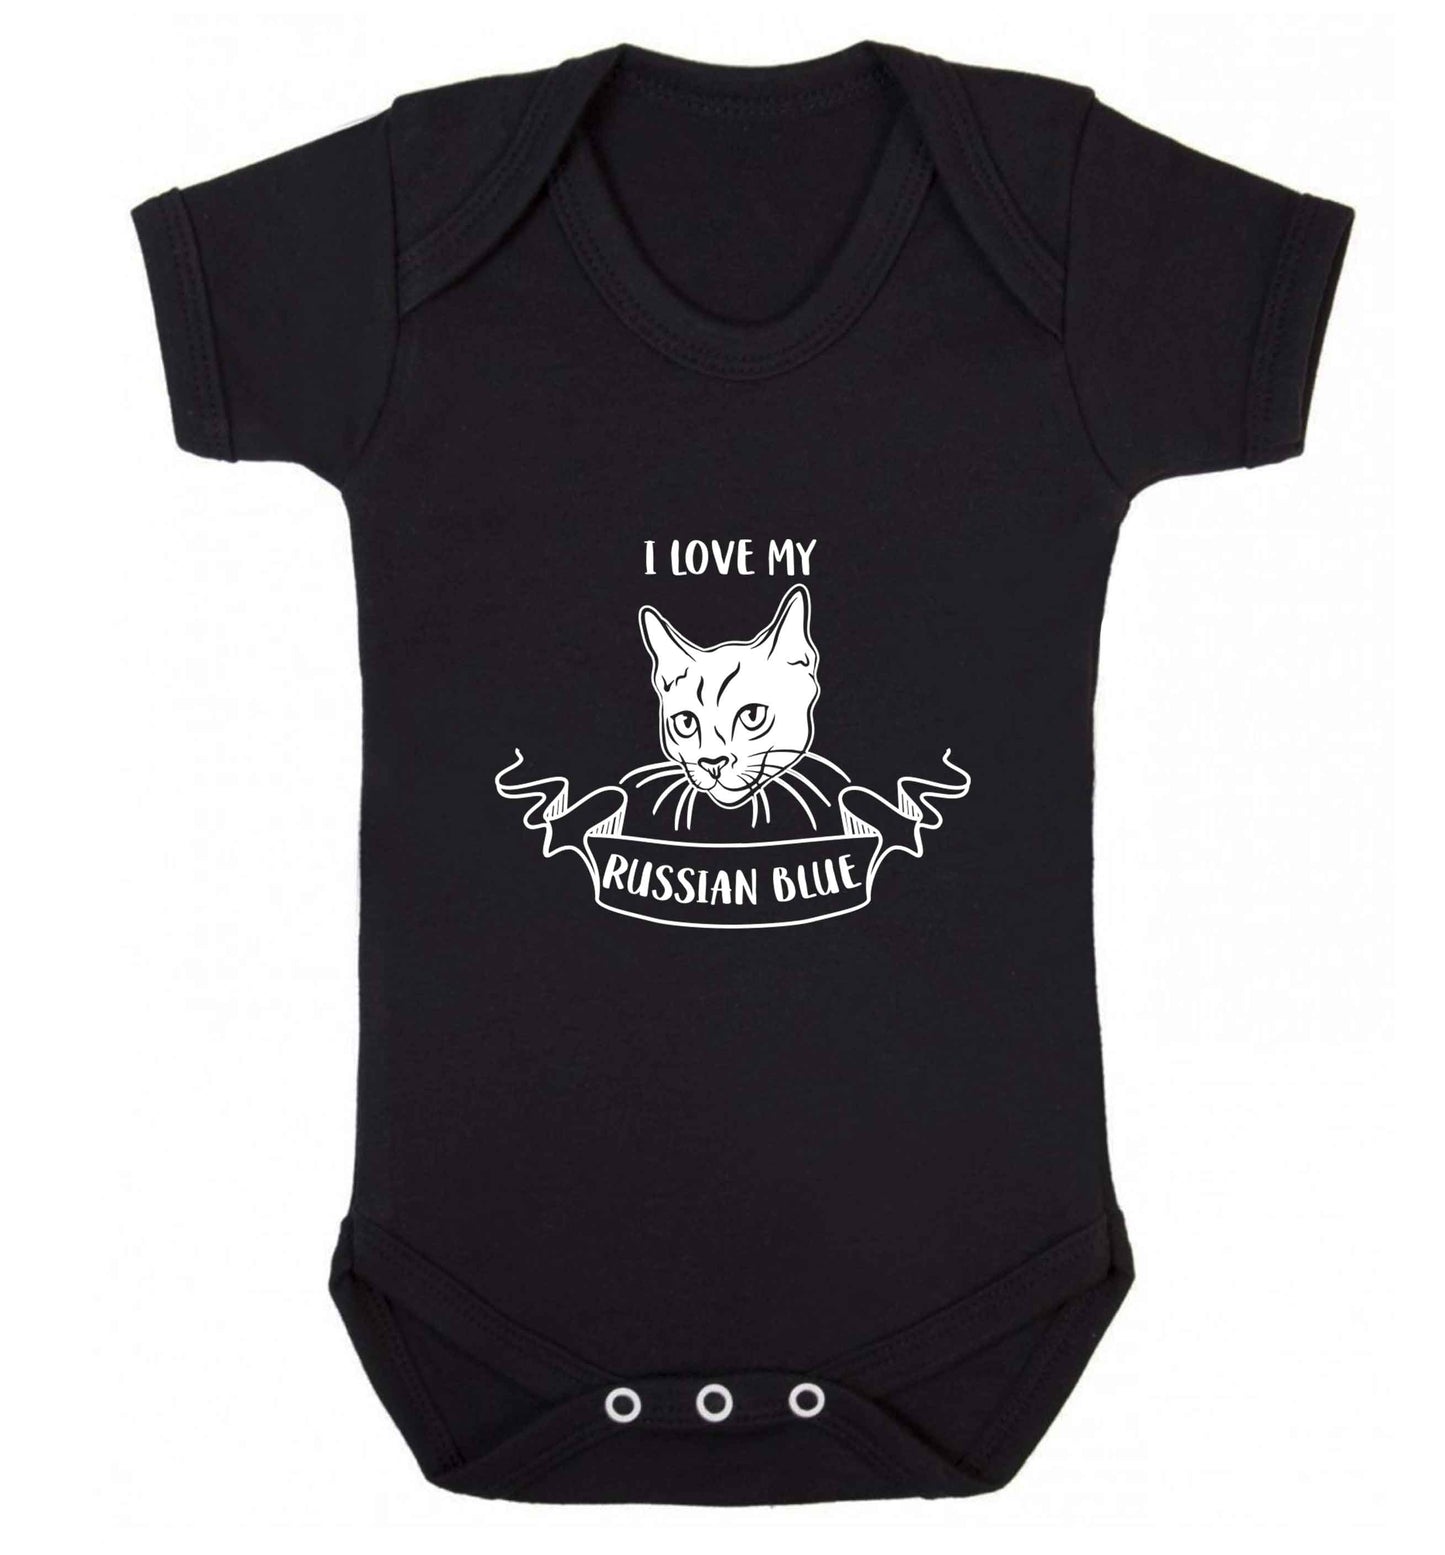 I love my russian blue baby vest black 18-24 months